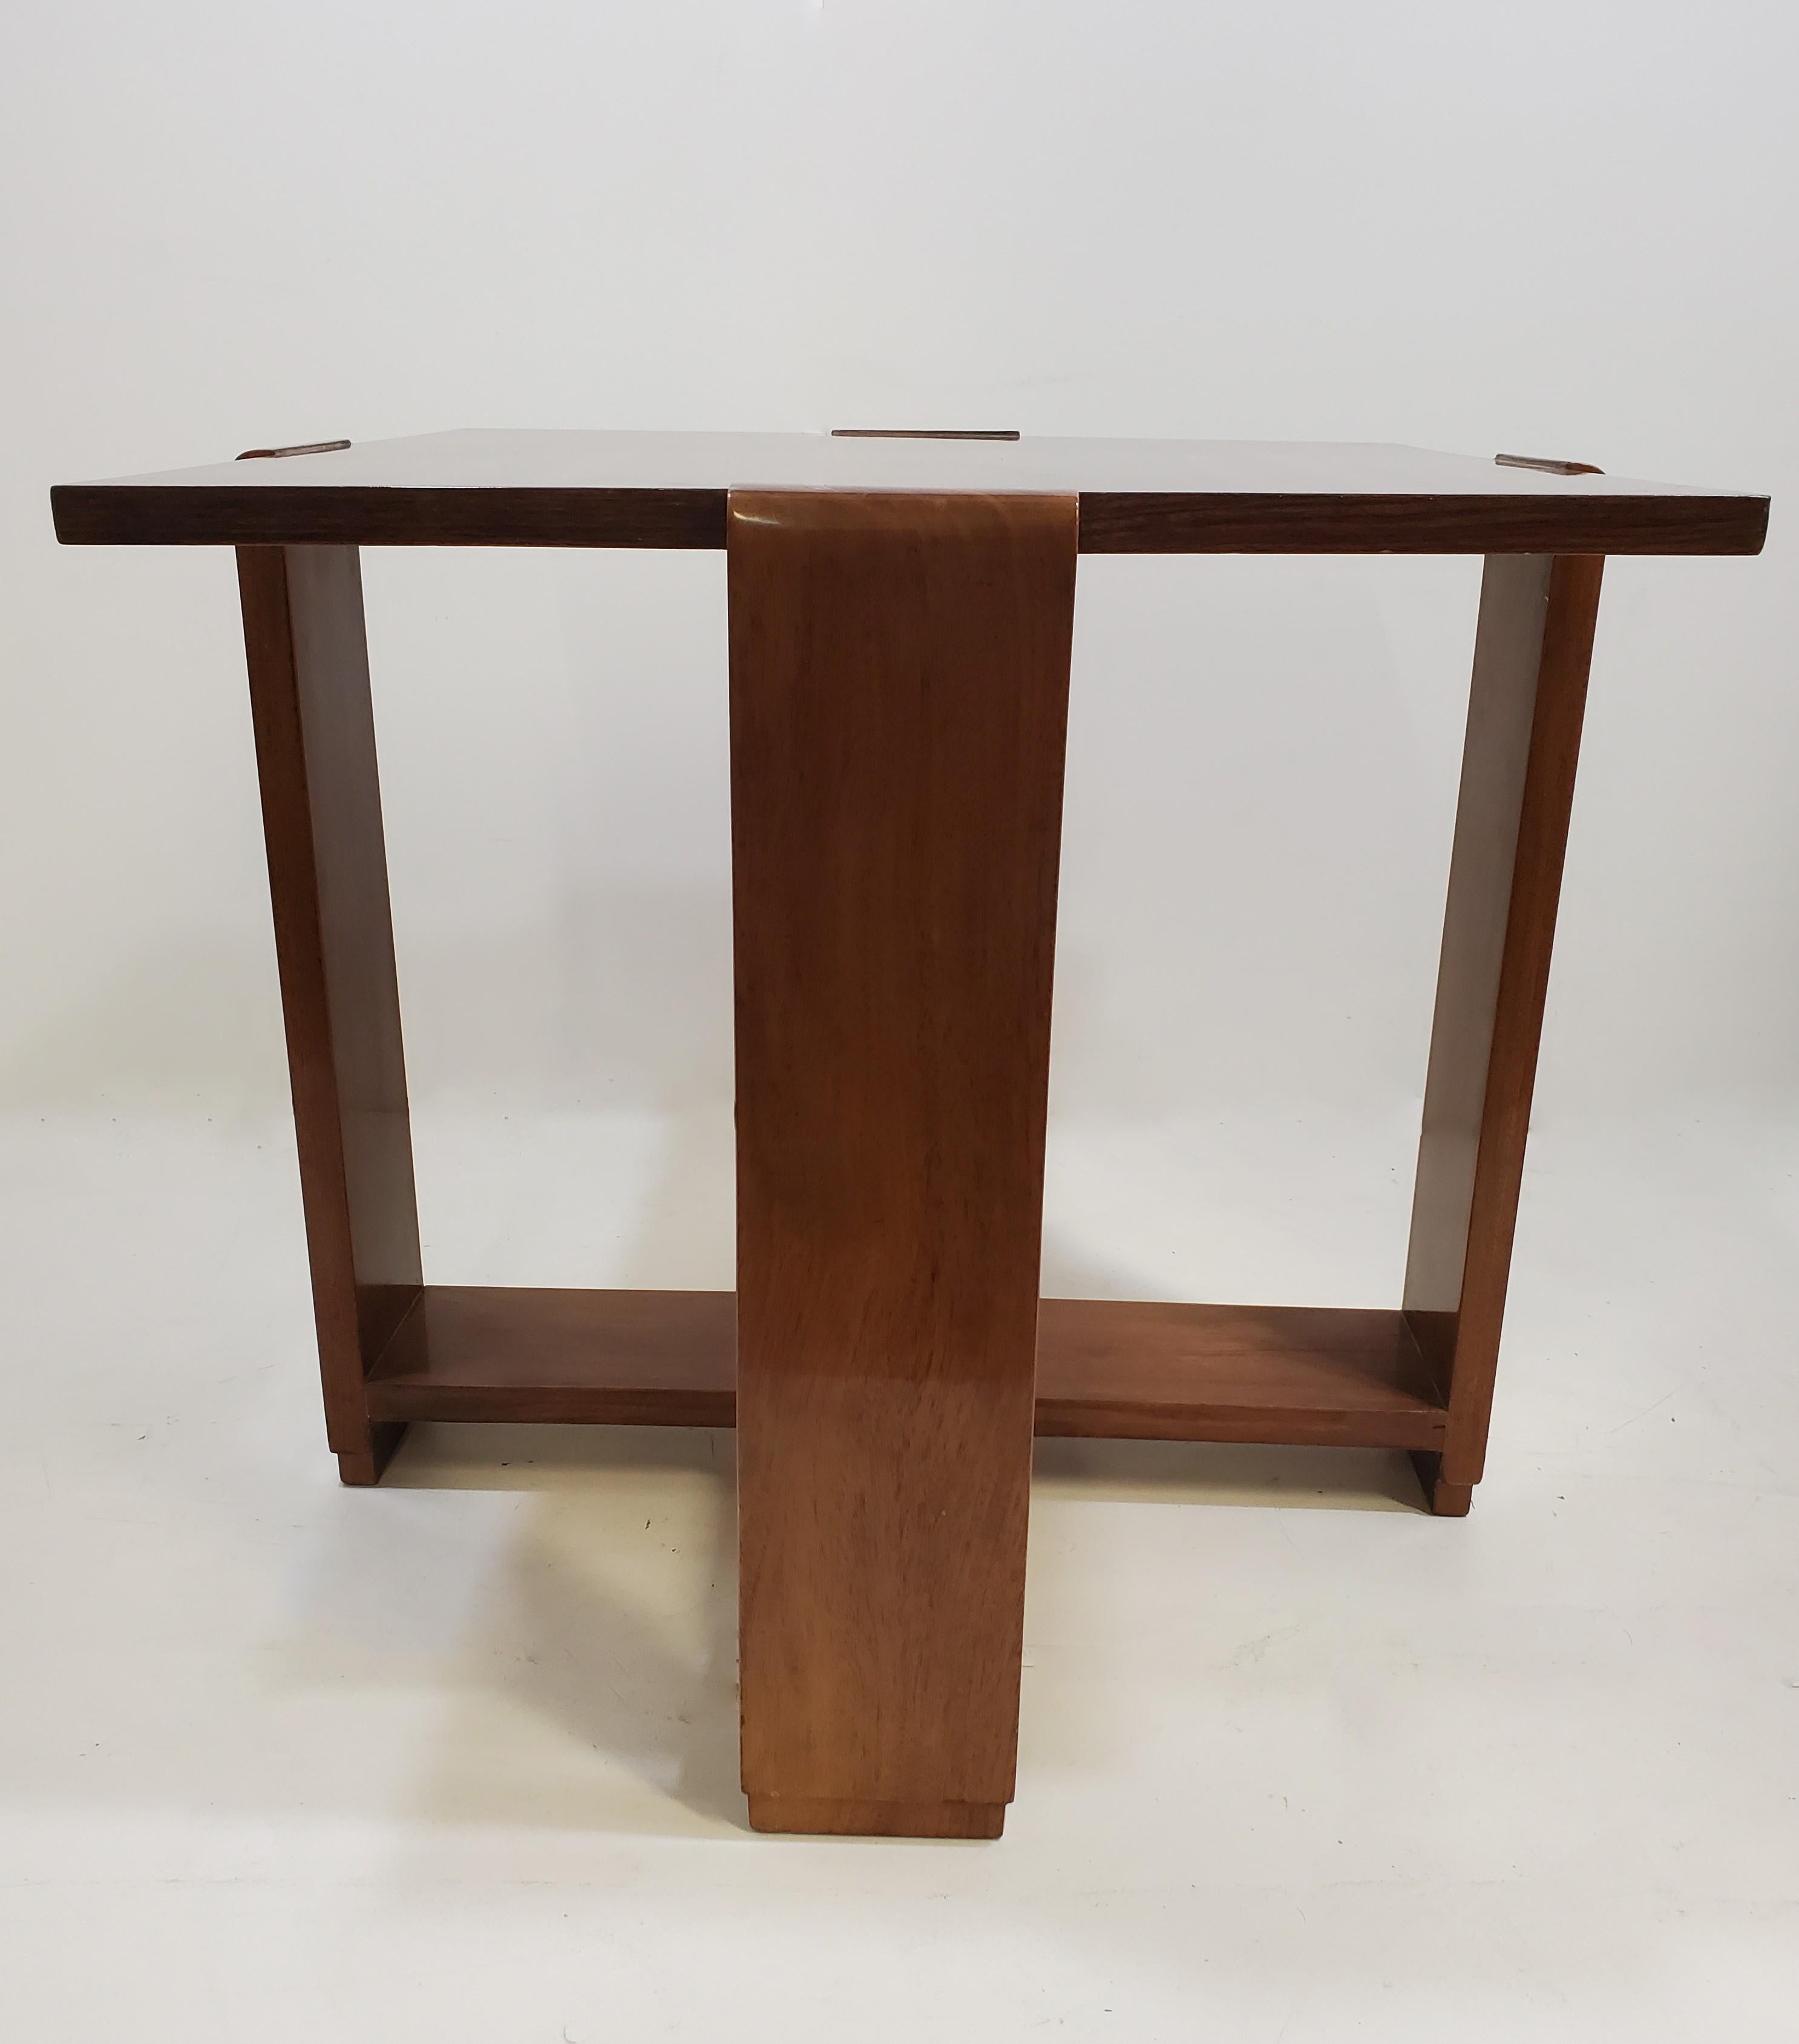 Original French Art Deco Macassar Ebony Square Table, Michel Roux-Spitz In Good Condition For Sale In New York City, NY